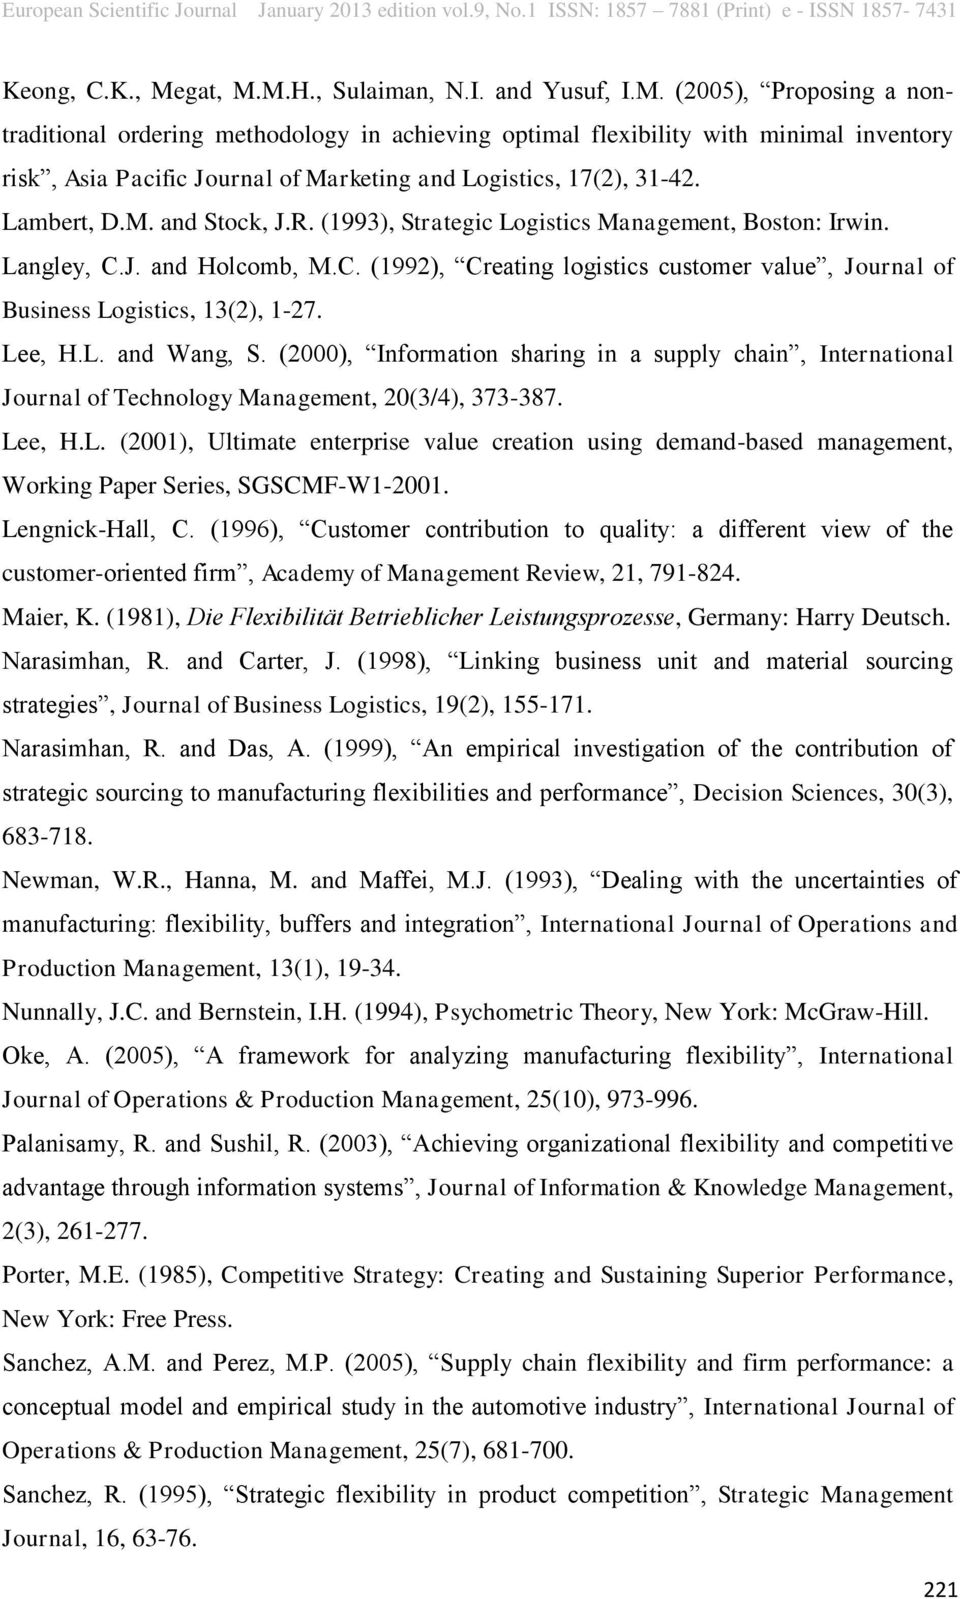 Lee, H.L. and Wang, S. (2000), Information sharing in a supply chain, International Journal of Technology Management, 20(3/4), 373-387. Lee, H.L. (2001), Ultimate enterprise value creation using demand-based management, Working Paper Series, SGSCMF-W1-2001.